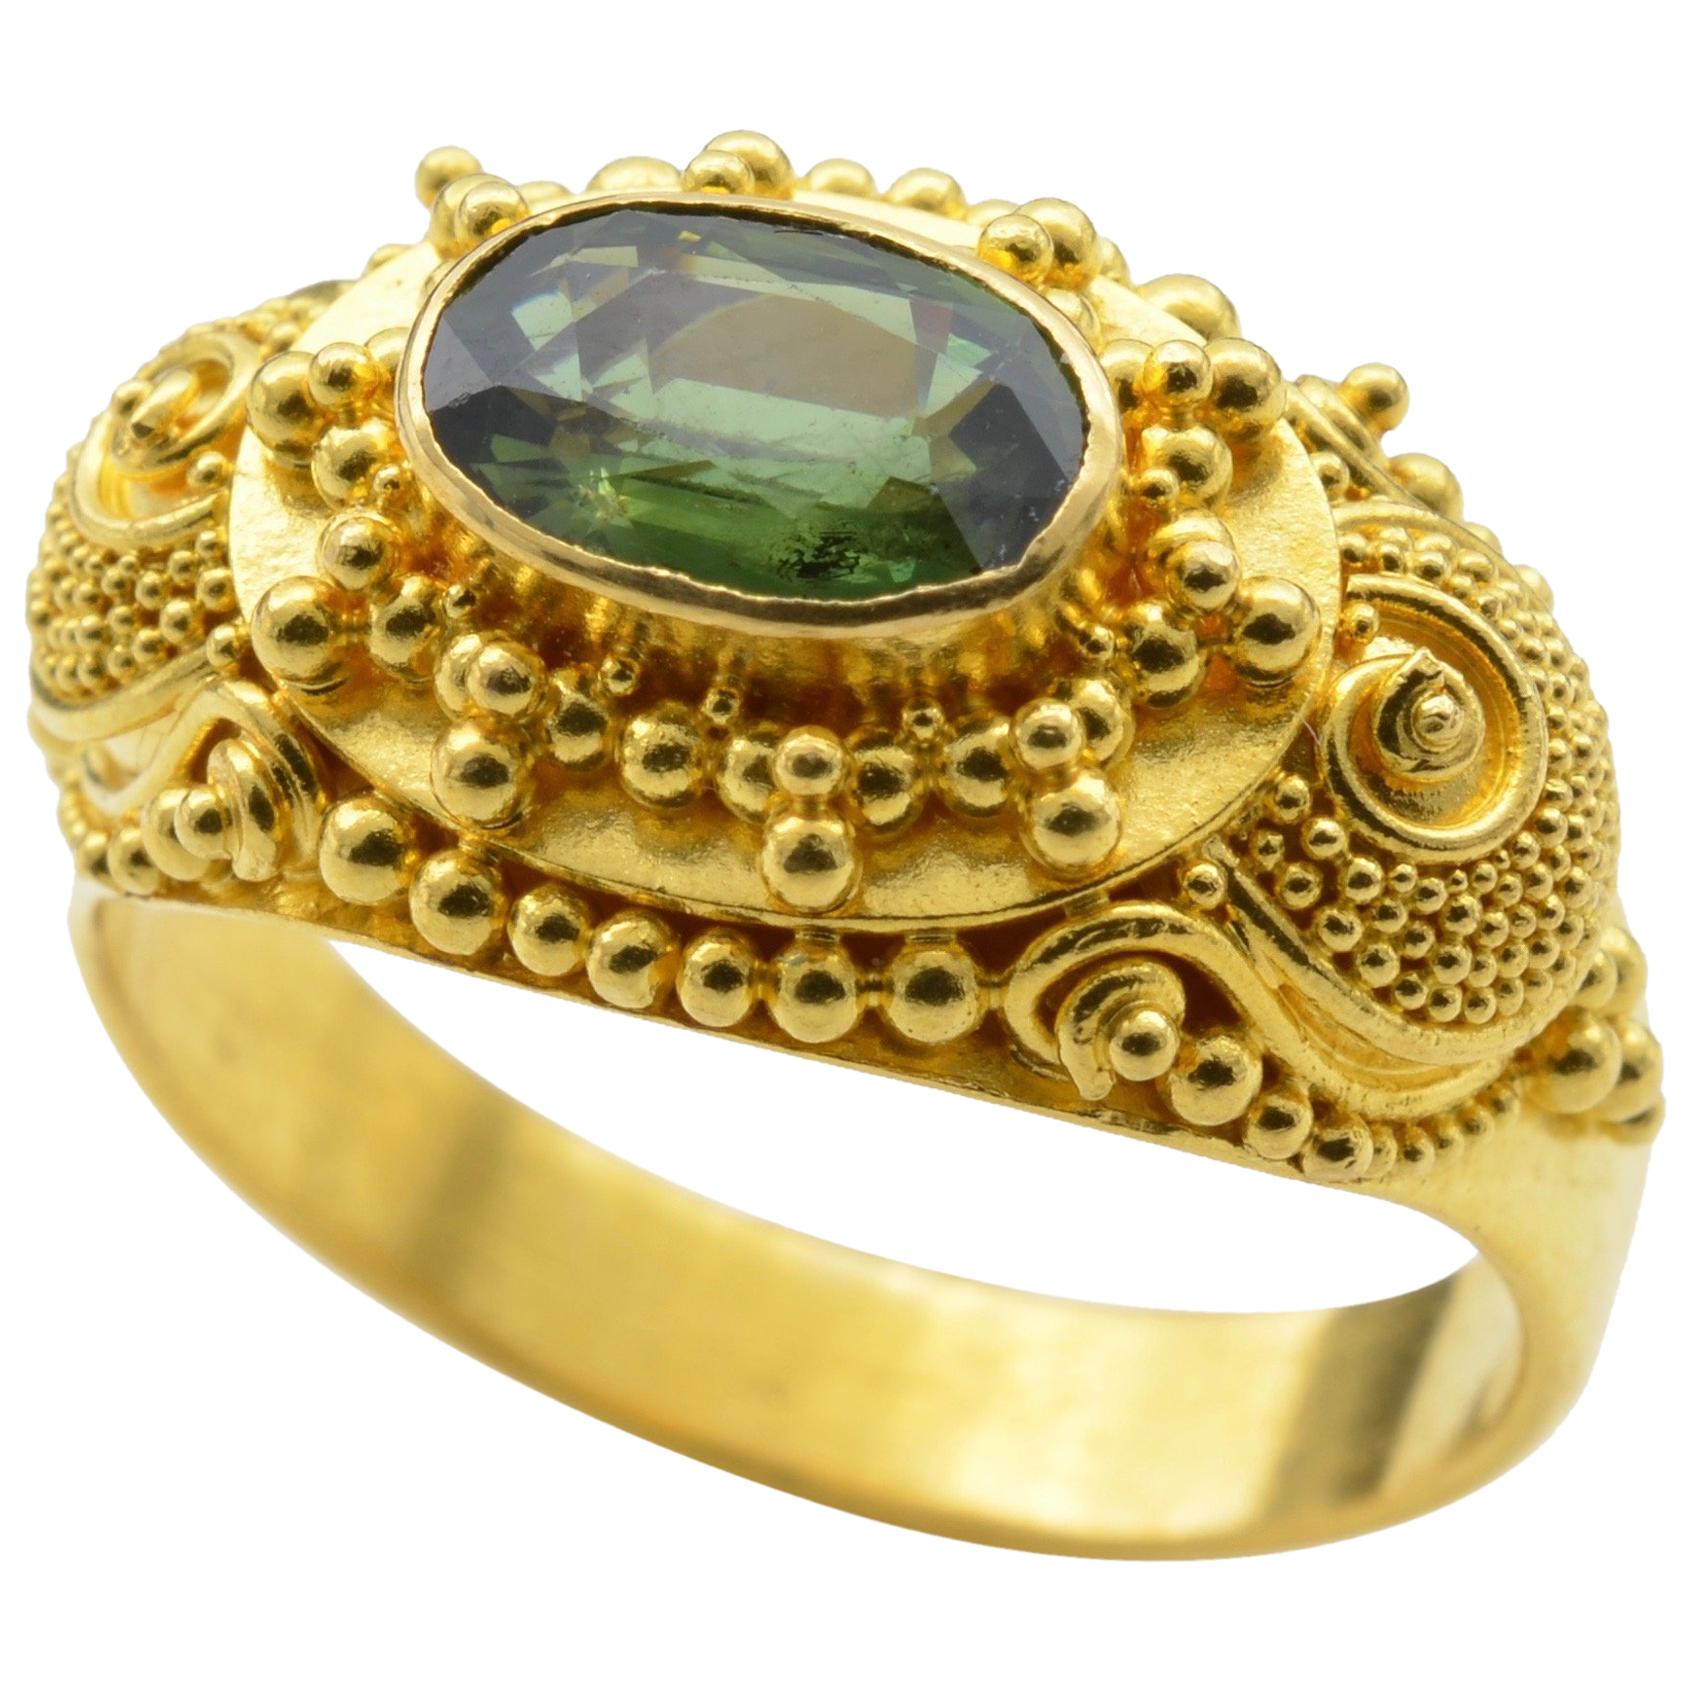 Green ‘Approximate 1.0 Carat’ Tourmaline Ring in 22 Karat Gold with Granulation For Sale